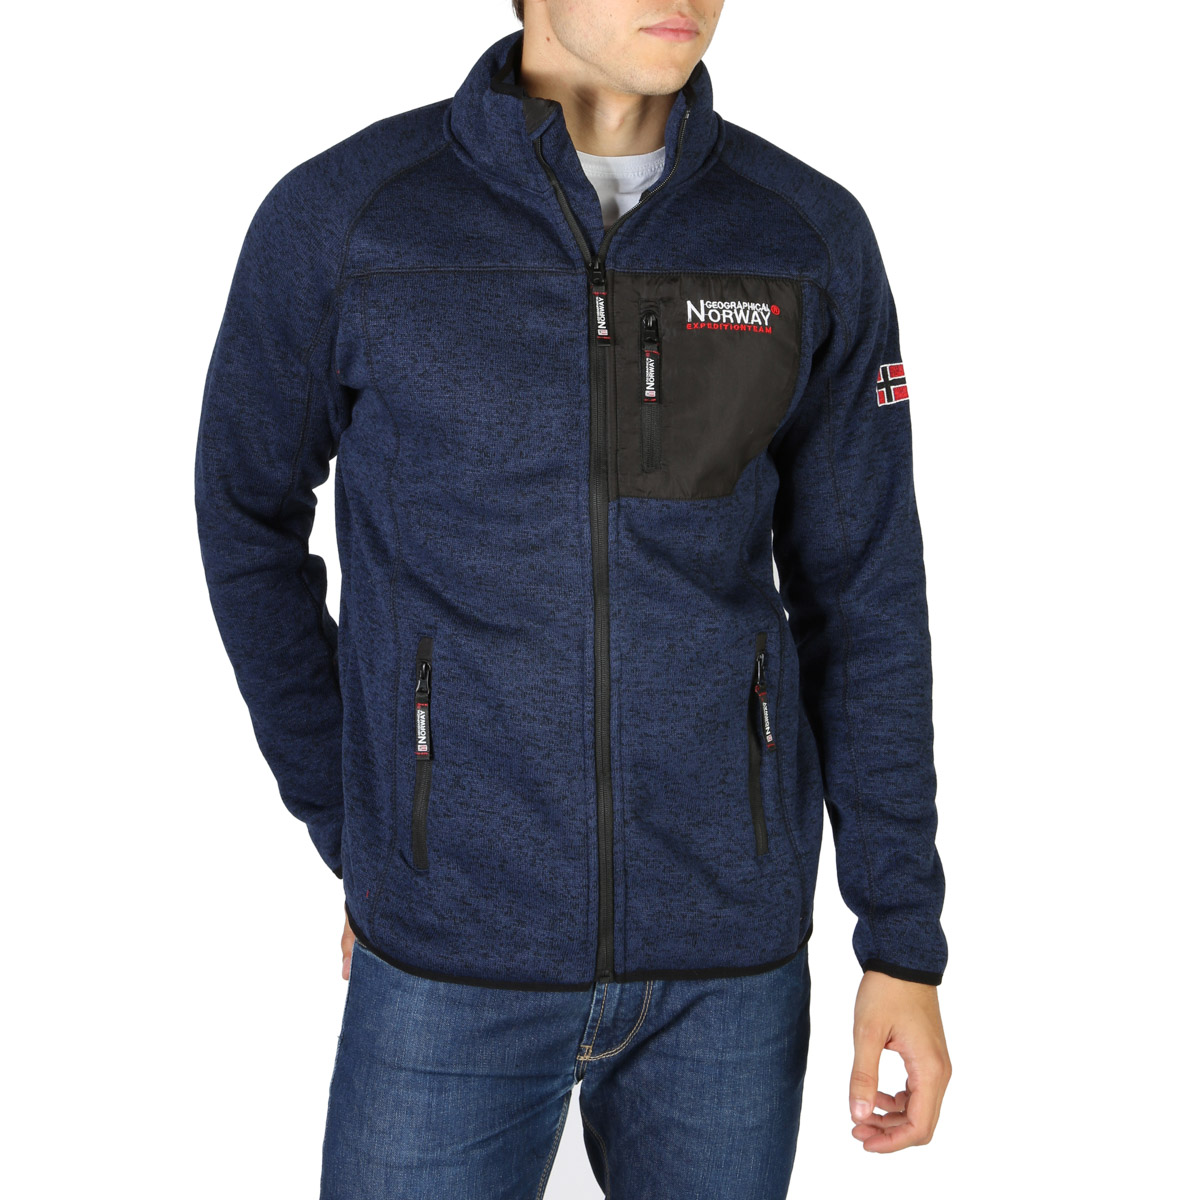 Geographical Norway Title man